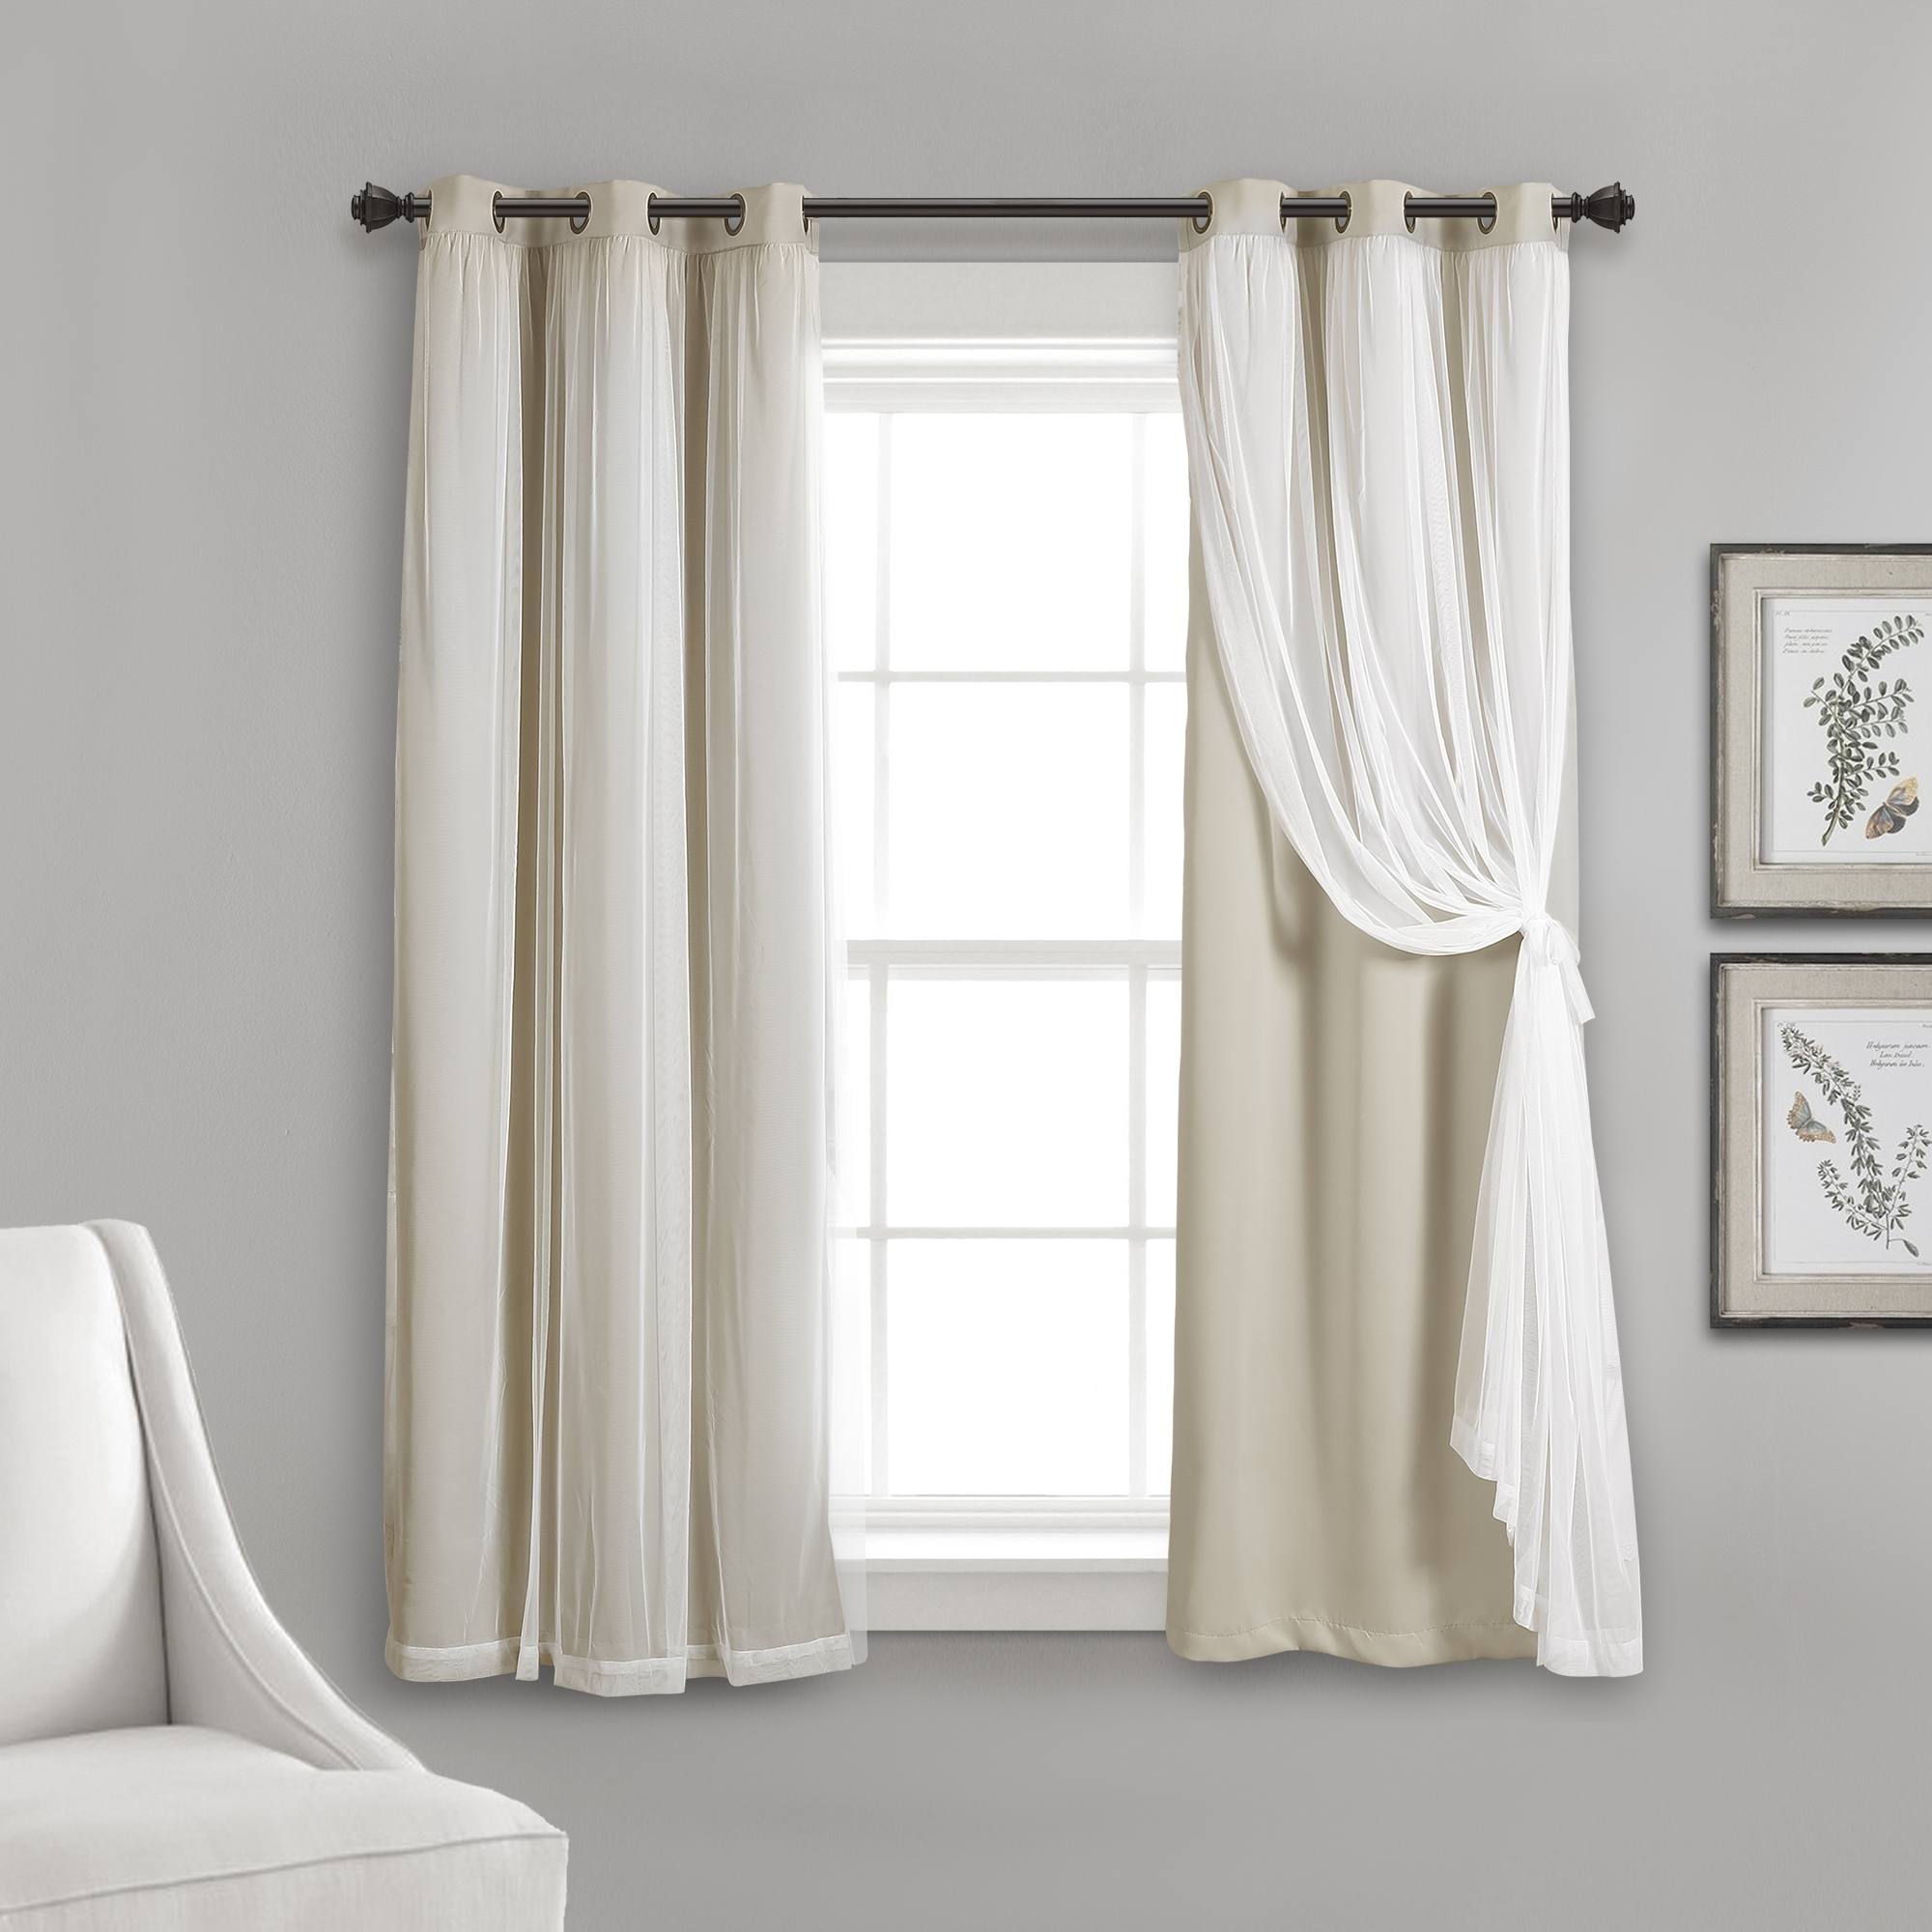 Lush Decor Lush Dcor Grommet Sheer Panels with Insulated Blackout